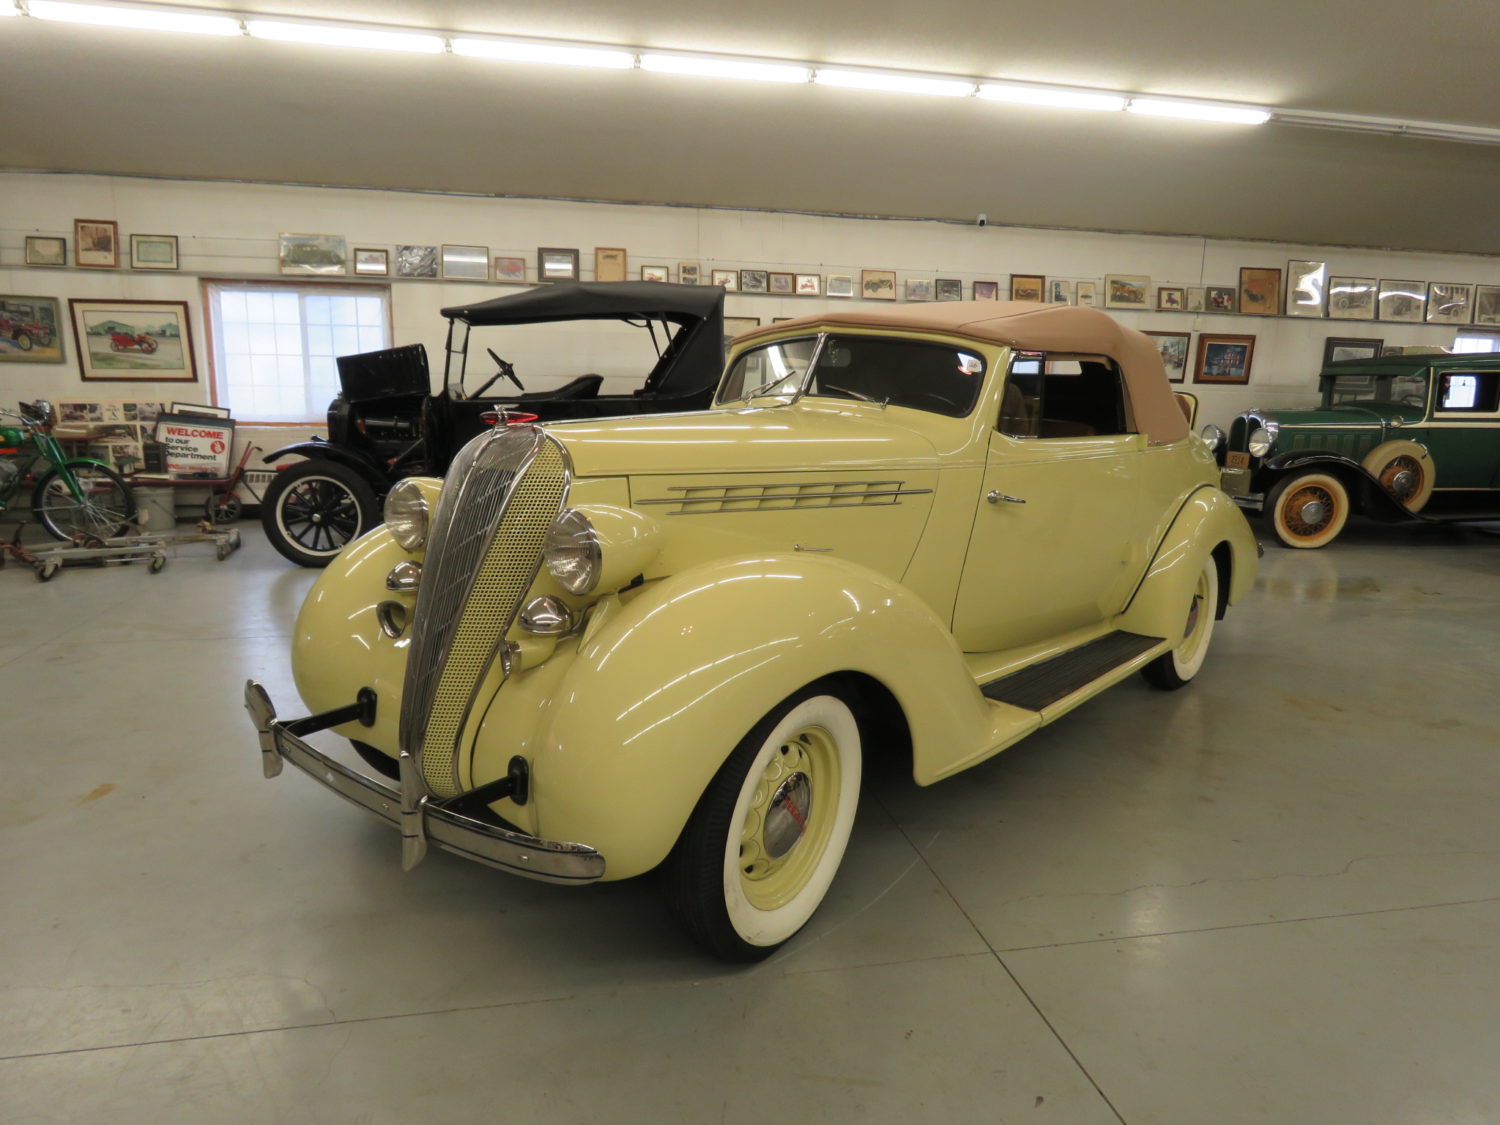 Rare and Beautiful Collector Cars, Parts, Memorabilia & More.. The Pellow Collection - image 1